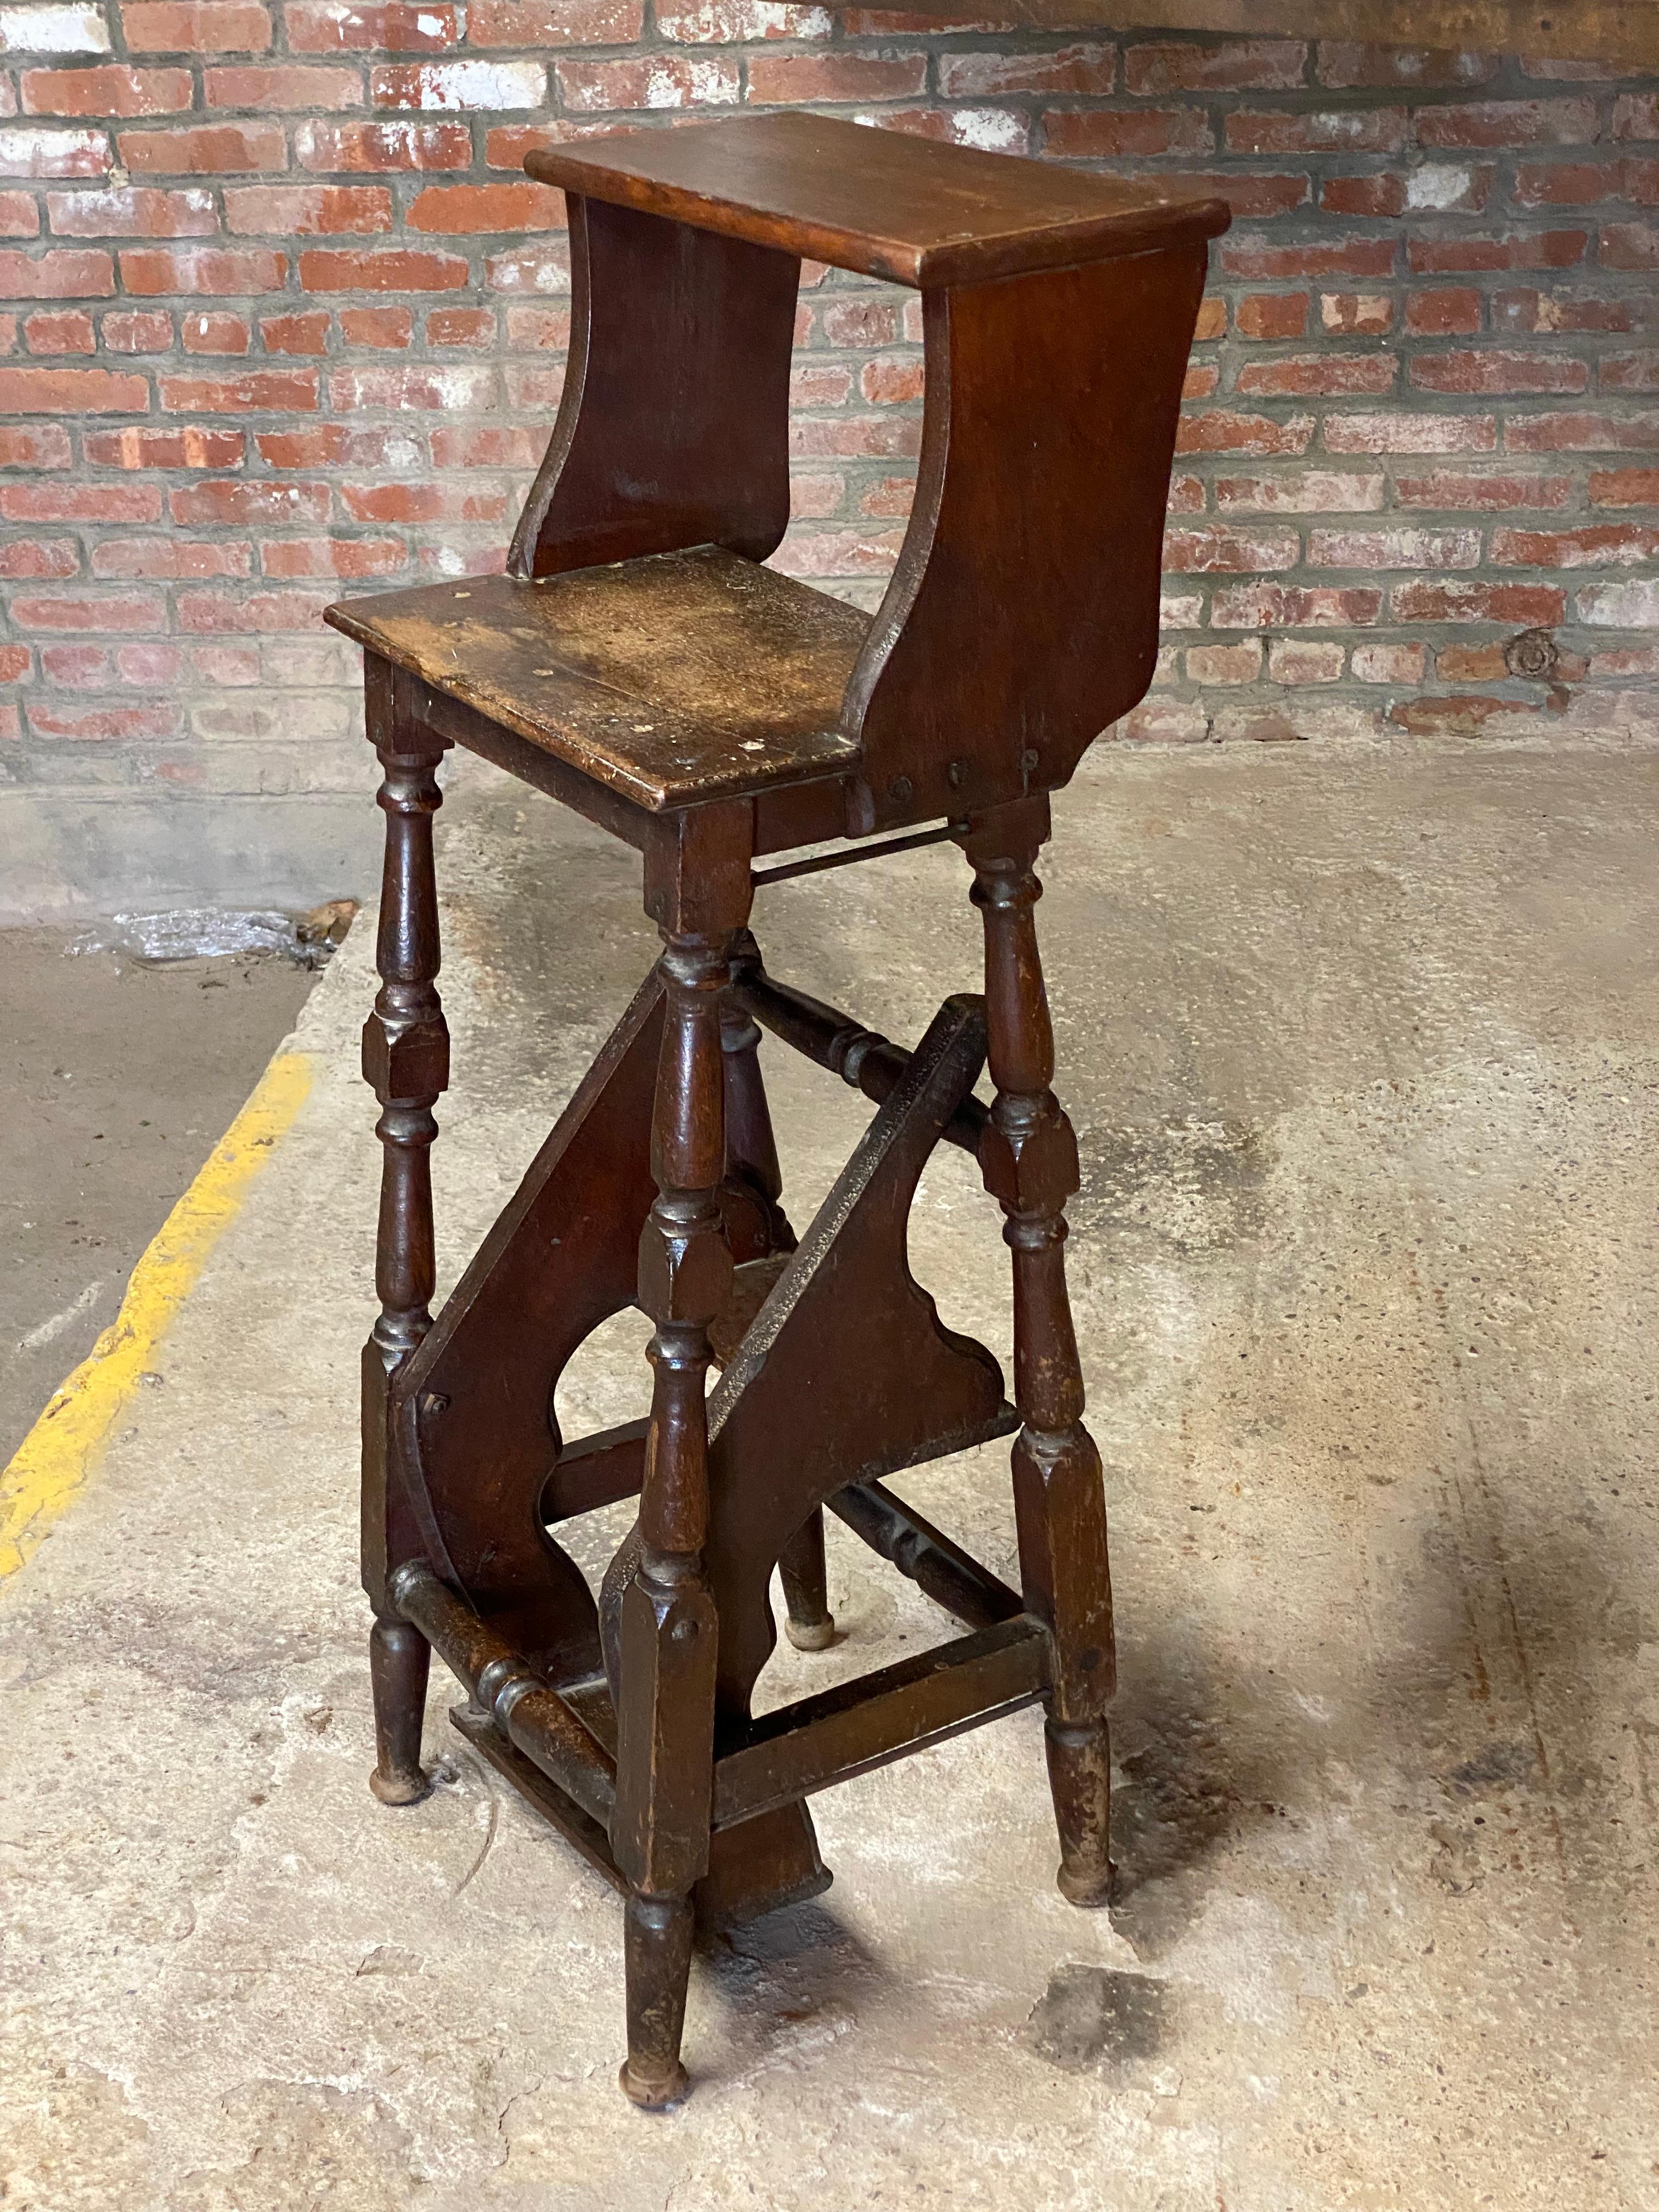 Elegant Victorian walnut fold out library step. The compact way of getting to those hard to reach books or objects on the highest shelf. Circa 1880-1900. When closed it could function as a high chair, stool or even a small shelf and when the lower